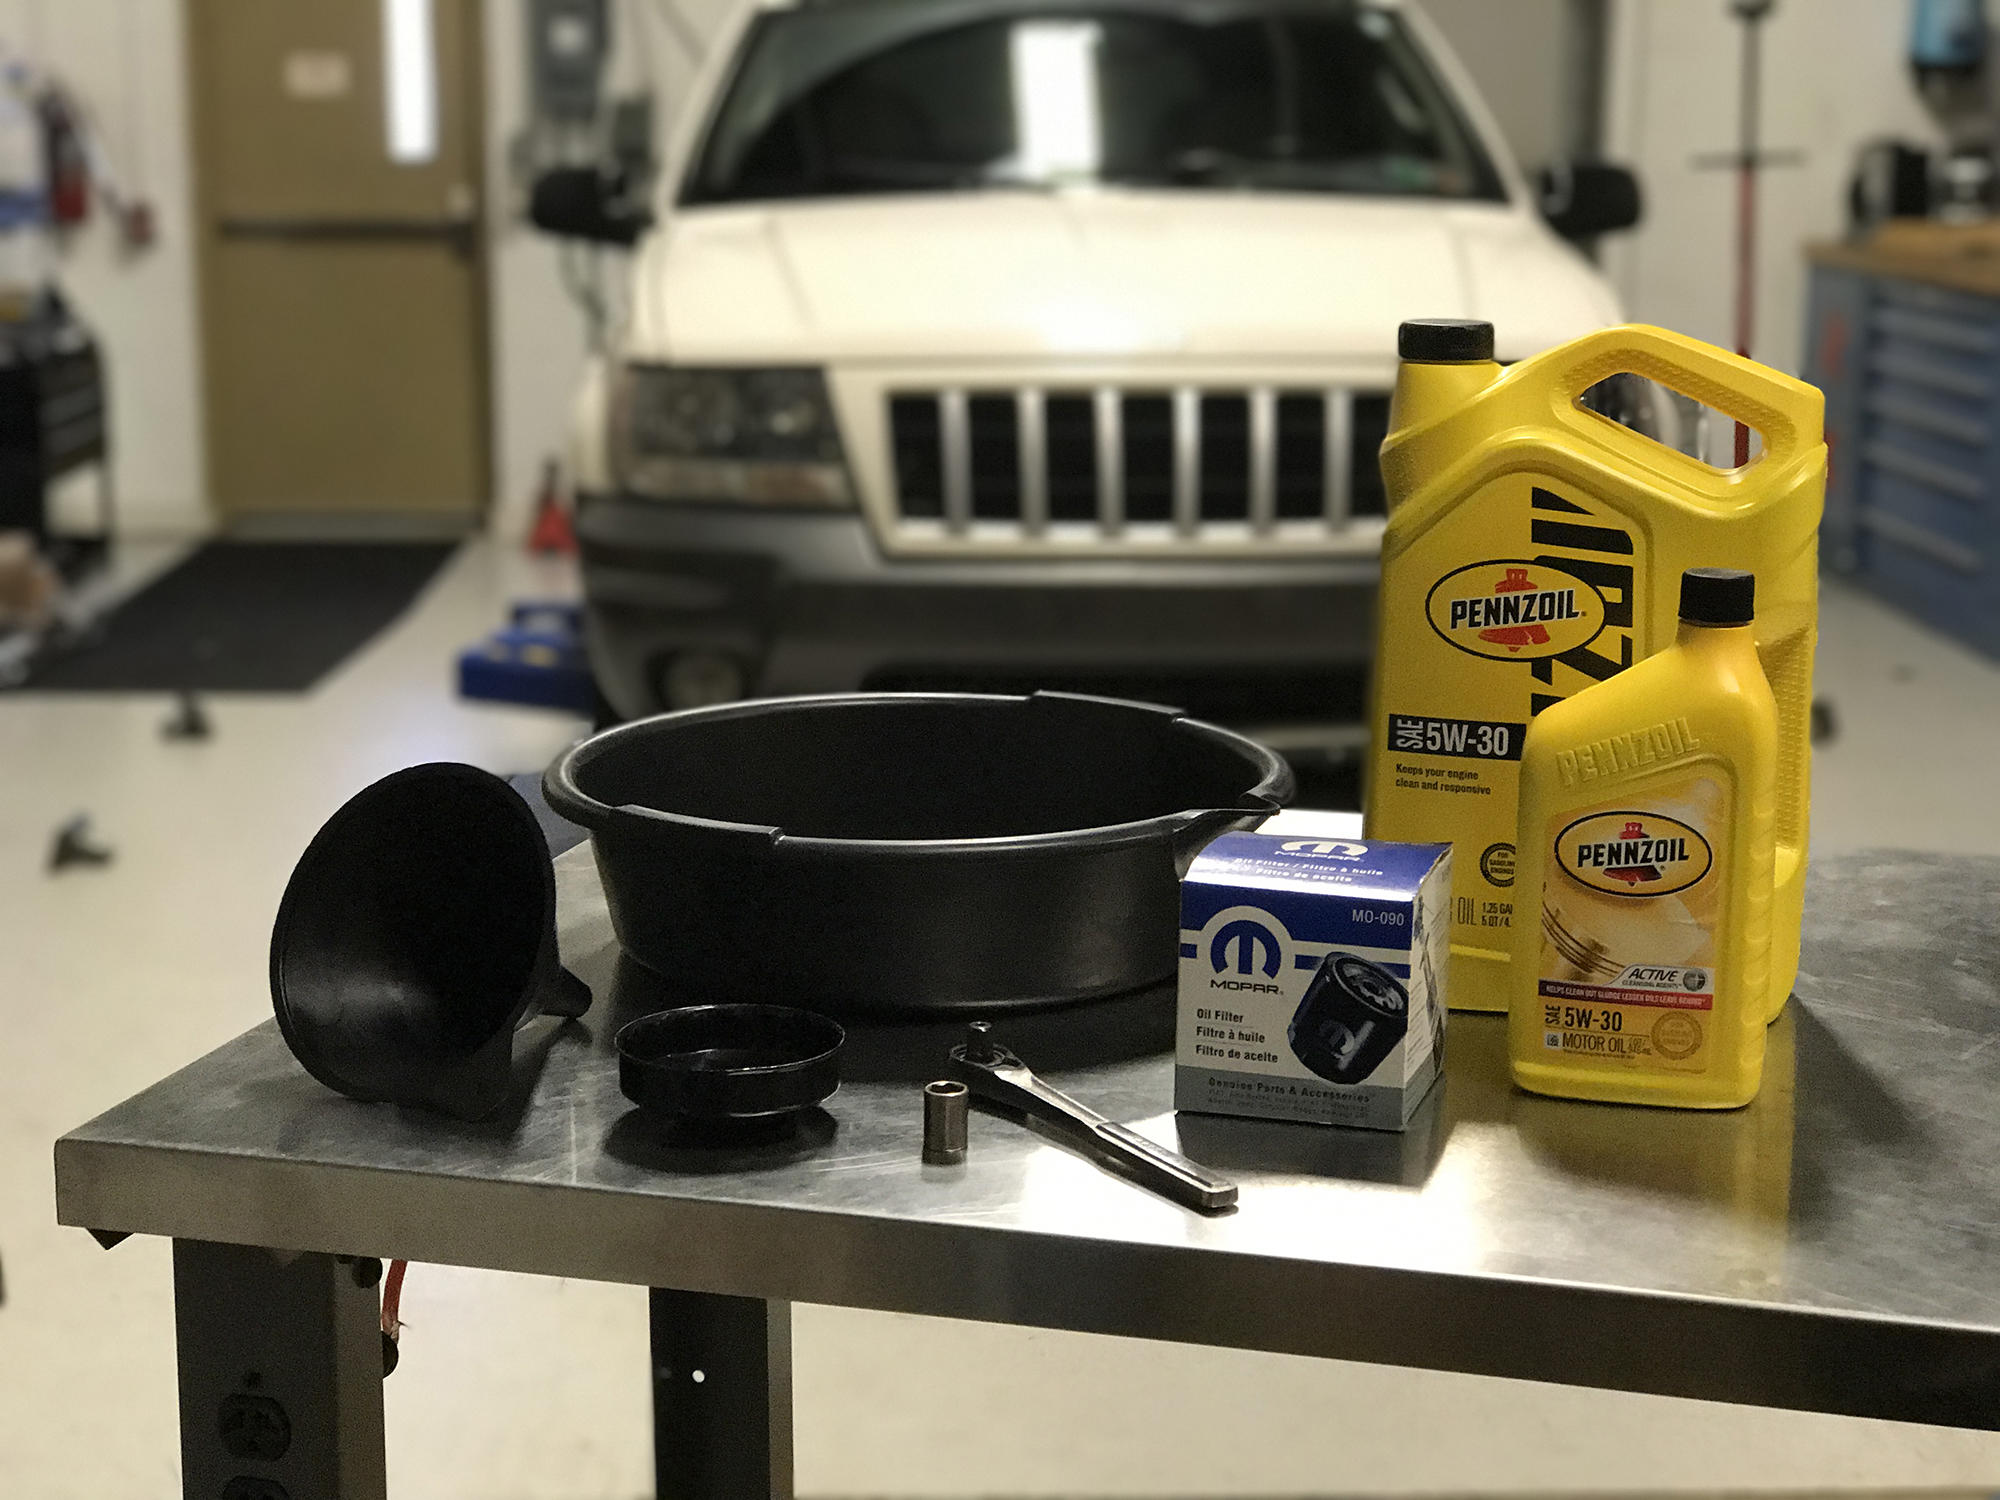 How To Do an Oil Change on a 1999-2004 Grand Cherokee 4.7L V8 | Quadratec